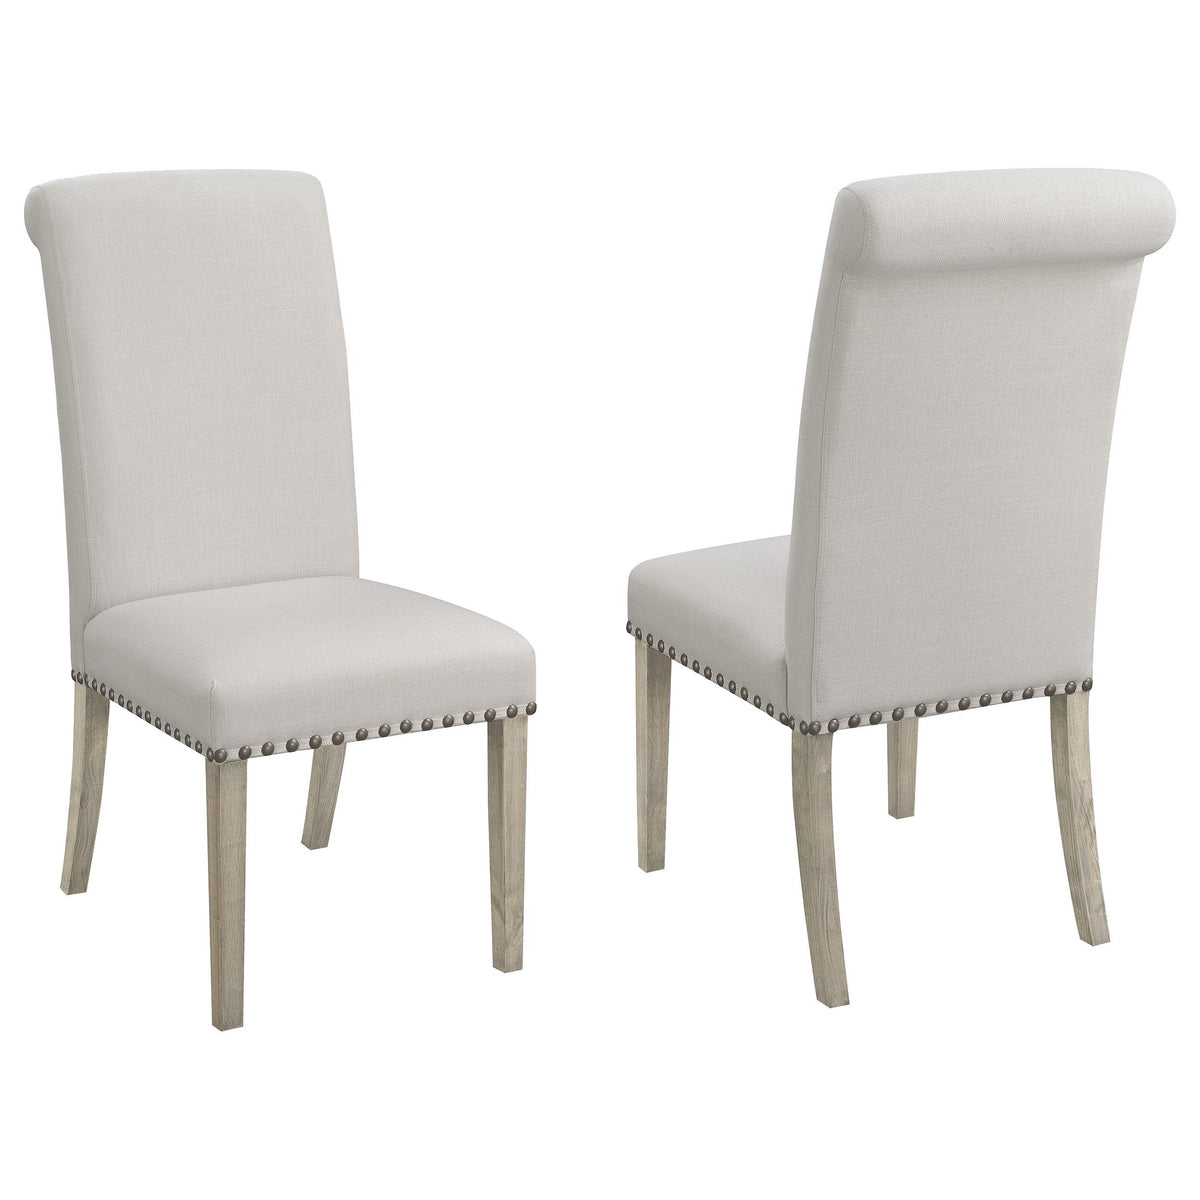 Salem Upholstered Side Chairs Rustic Smoke and Grey (Set of 2)  Las Vegas Furniture Stores